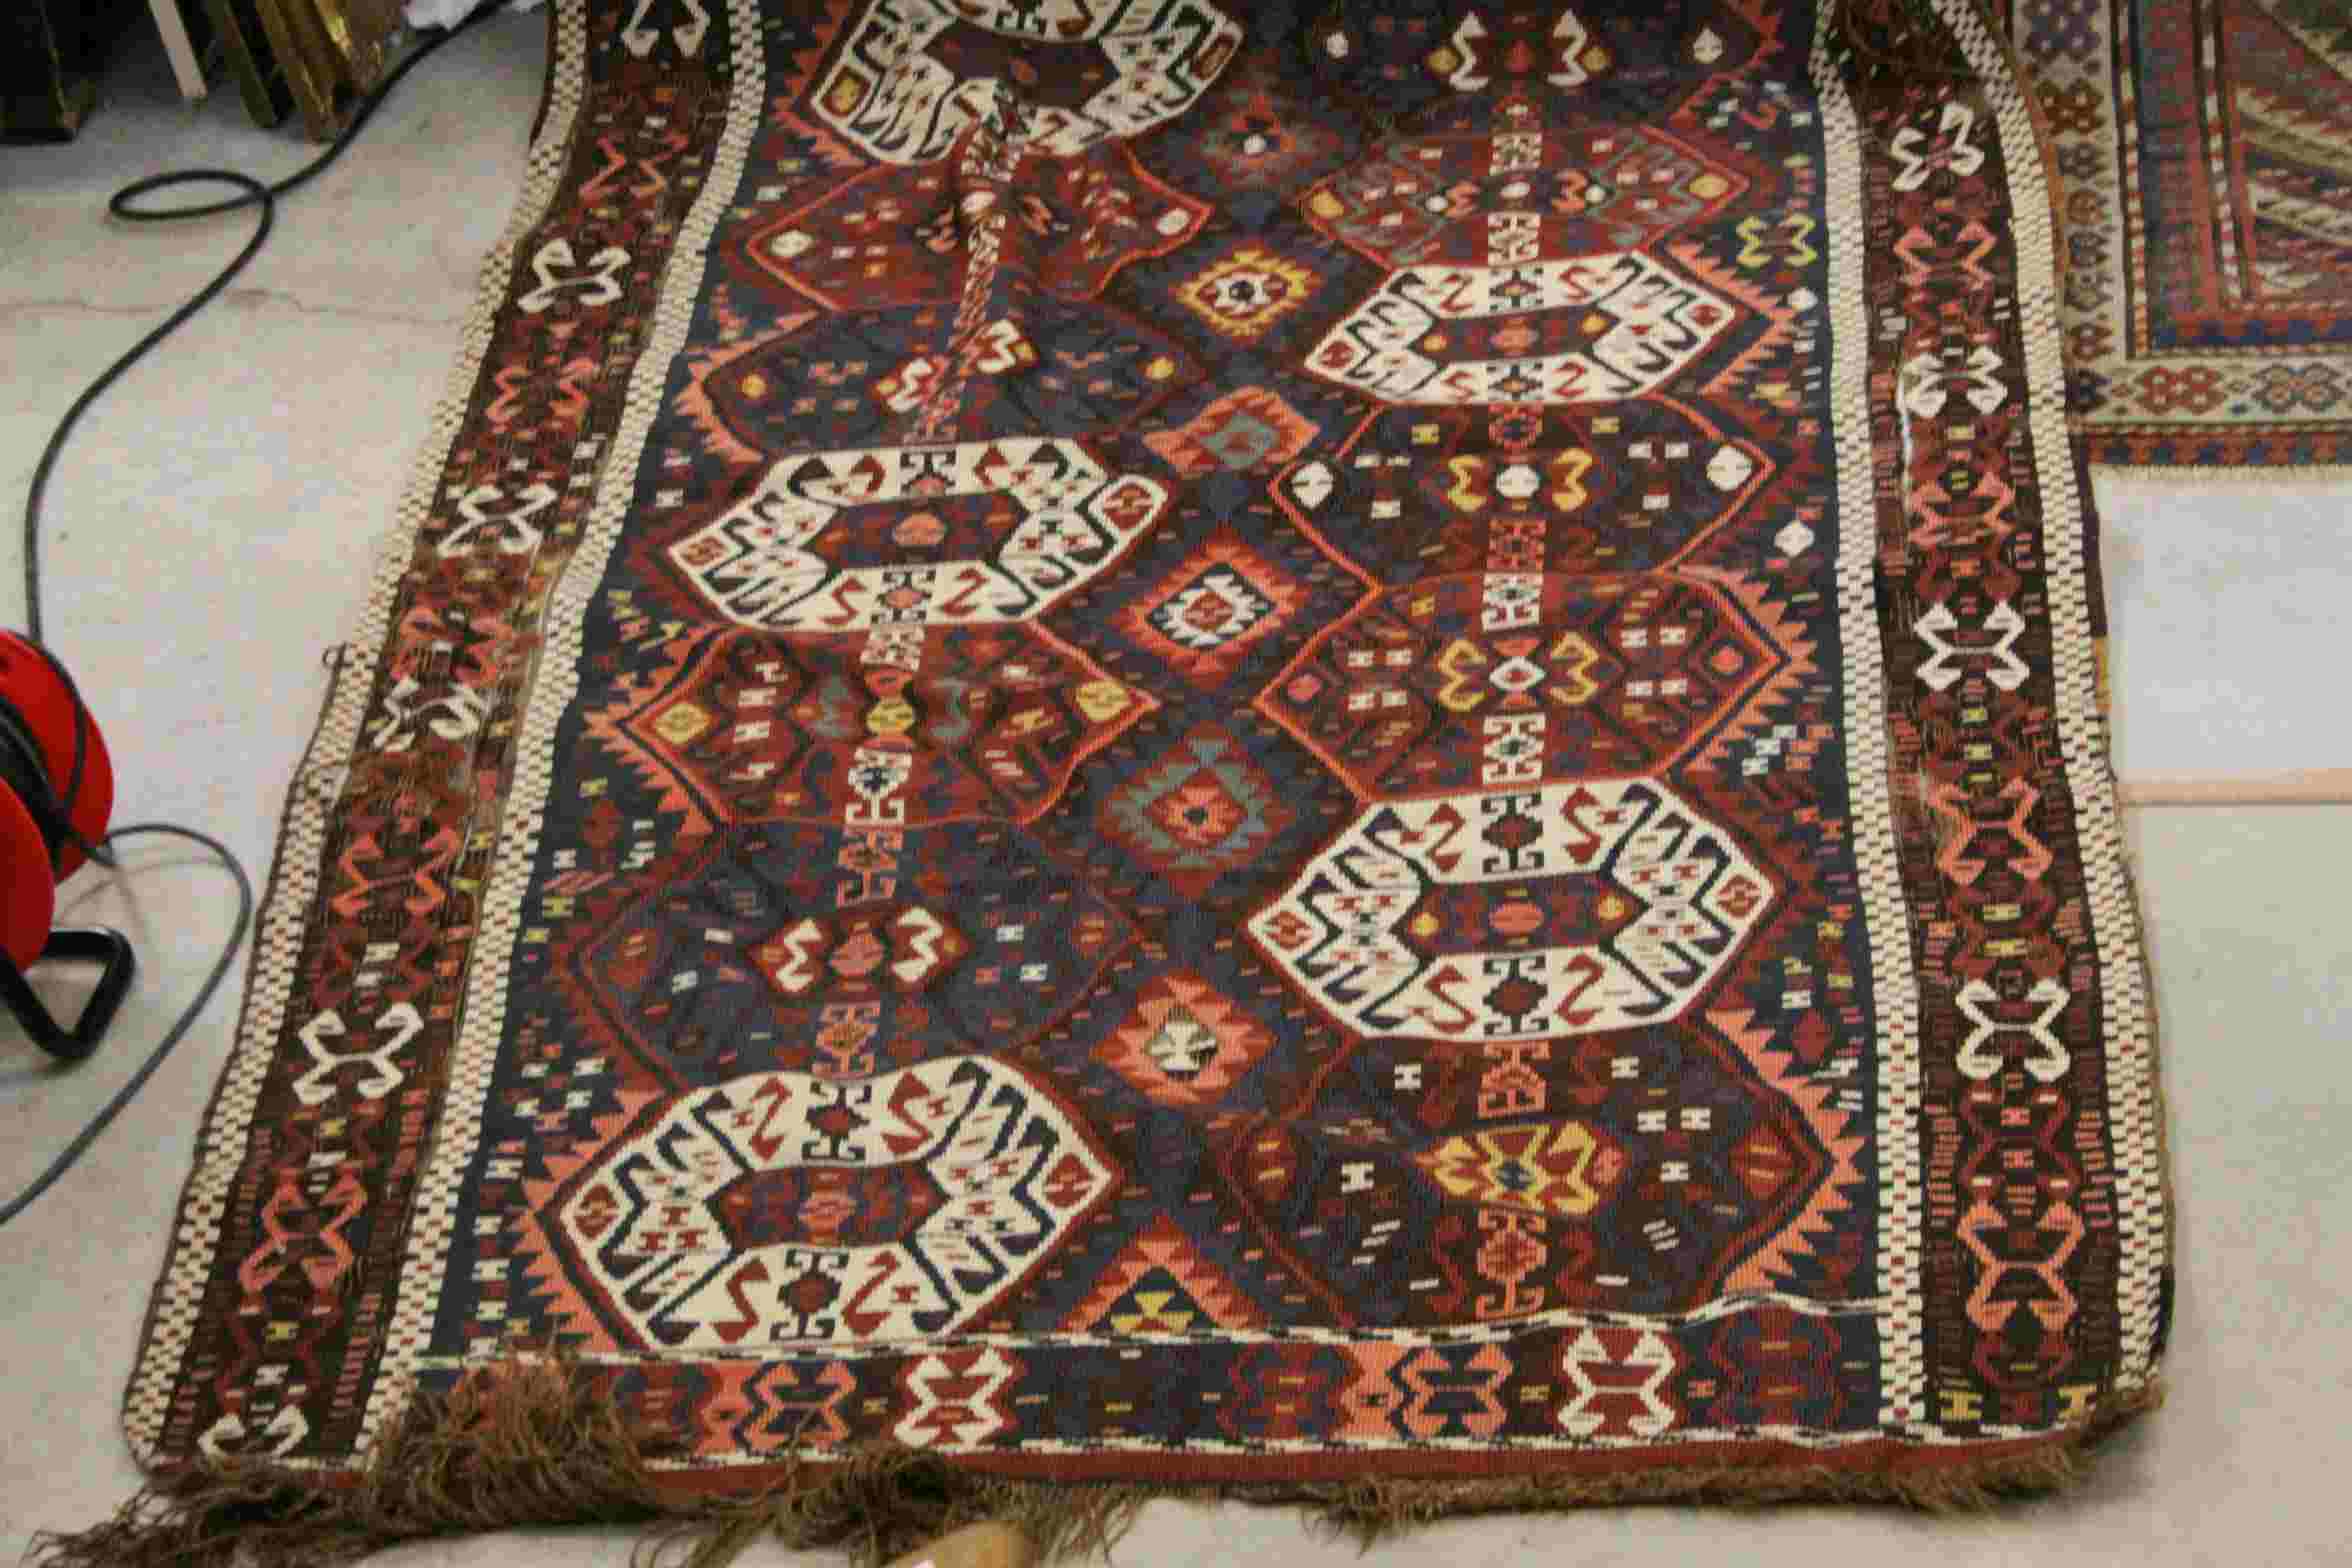 Eastern Red and Blue Ground Rug 300cms x 125cms together with another Rug 182cms x 86cms - Image 3 of 9